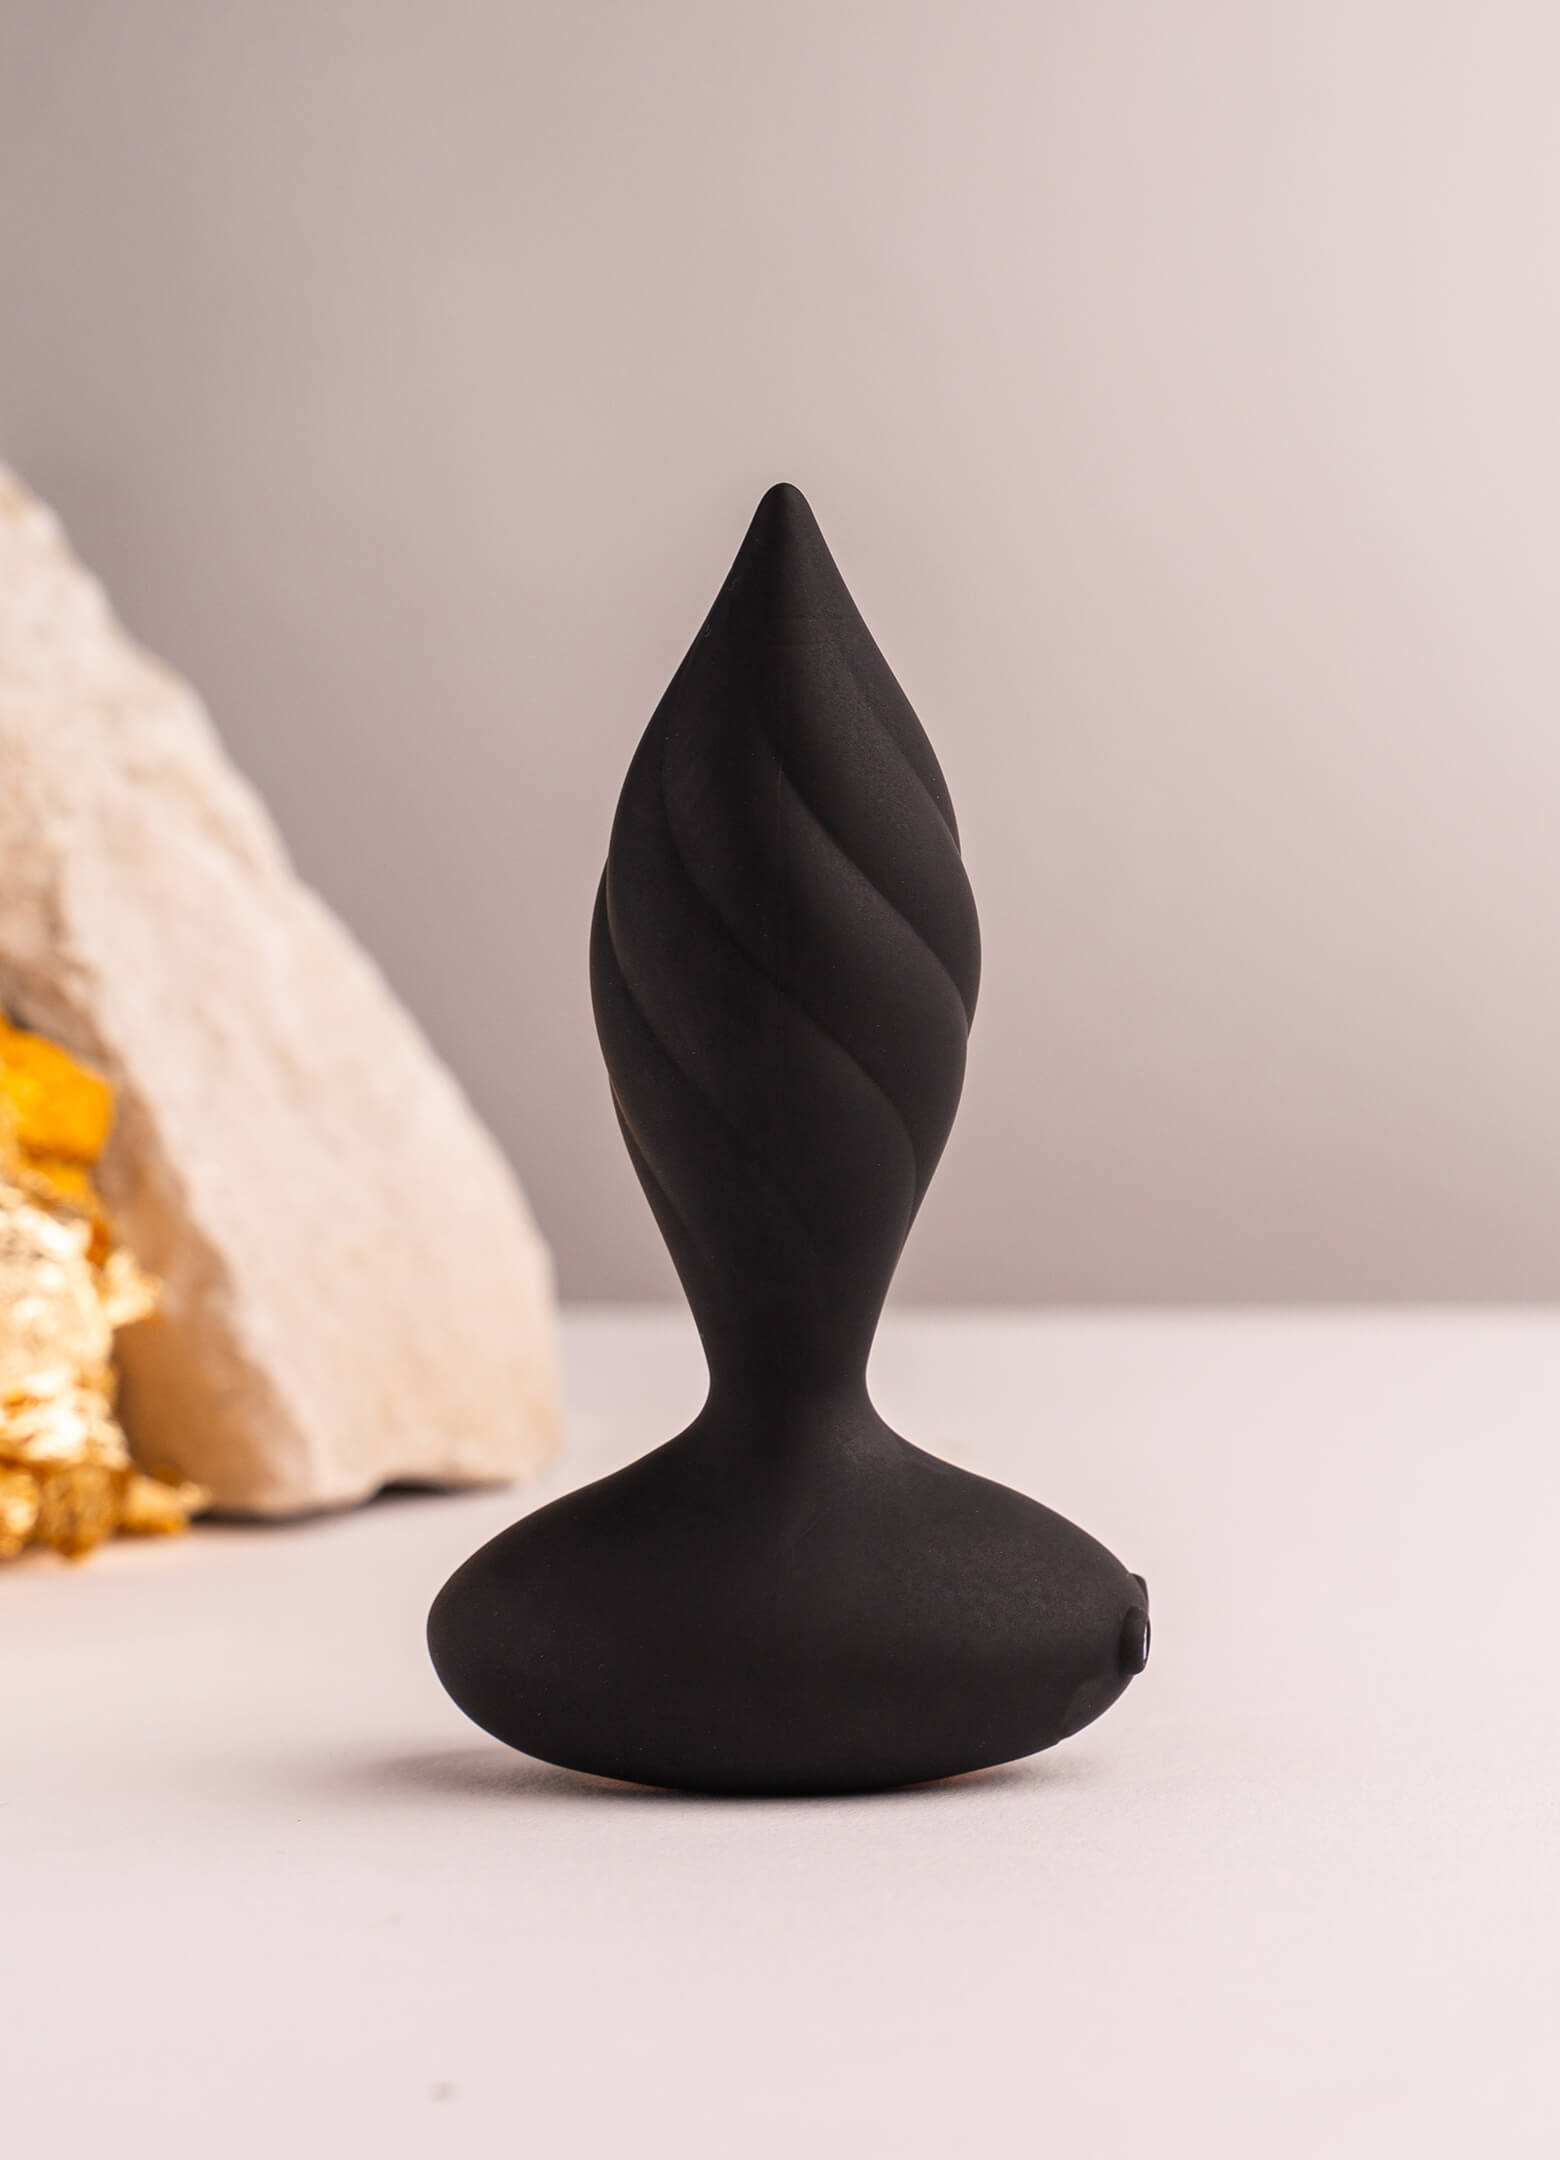 Black silicone butt plug with a tapered tip and twisted surface design.